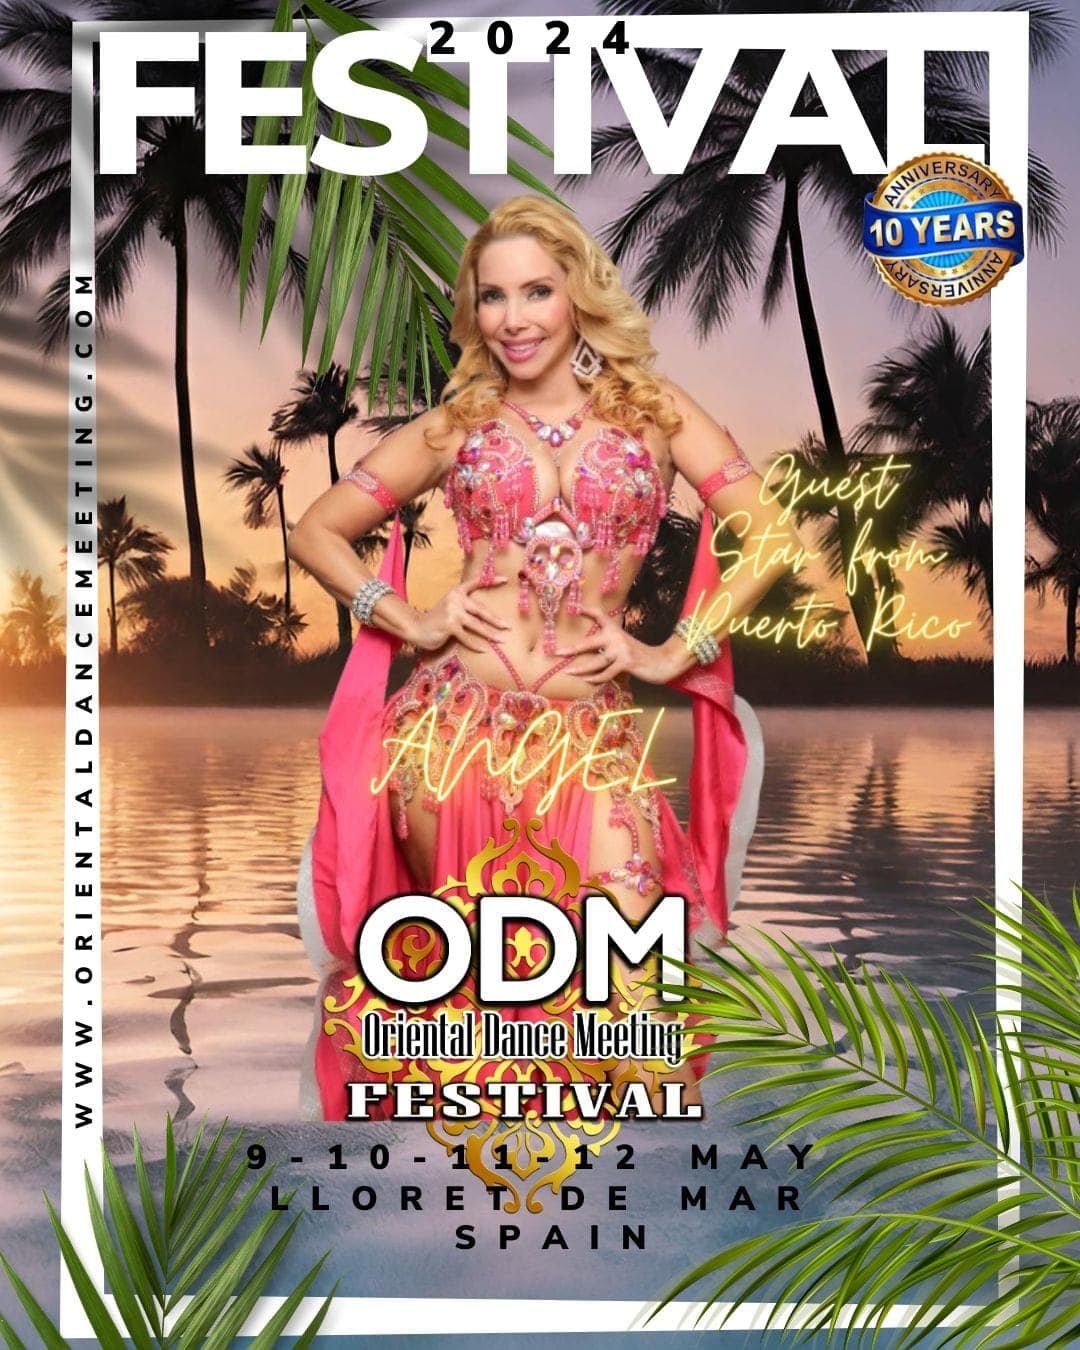 SPAIN🇪🇸!!! A while in told y&rsquo;all I had a performance coming up in Europe! Well, here is it is! I&rsquo;ll see you all at Oriental Dance Meeting Festival in Spain ❤️❤️❤️